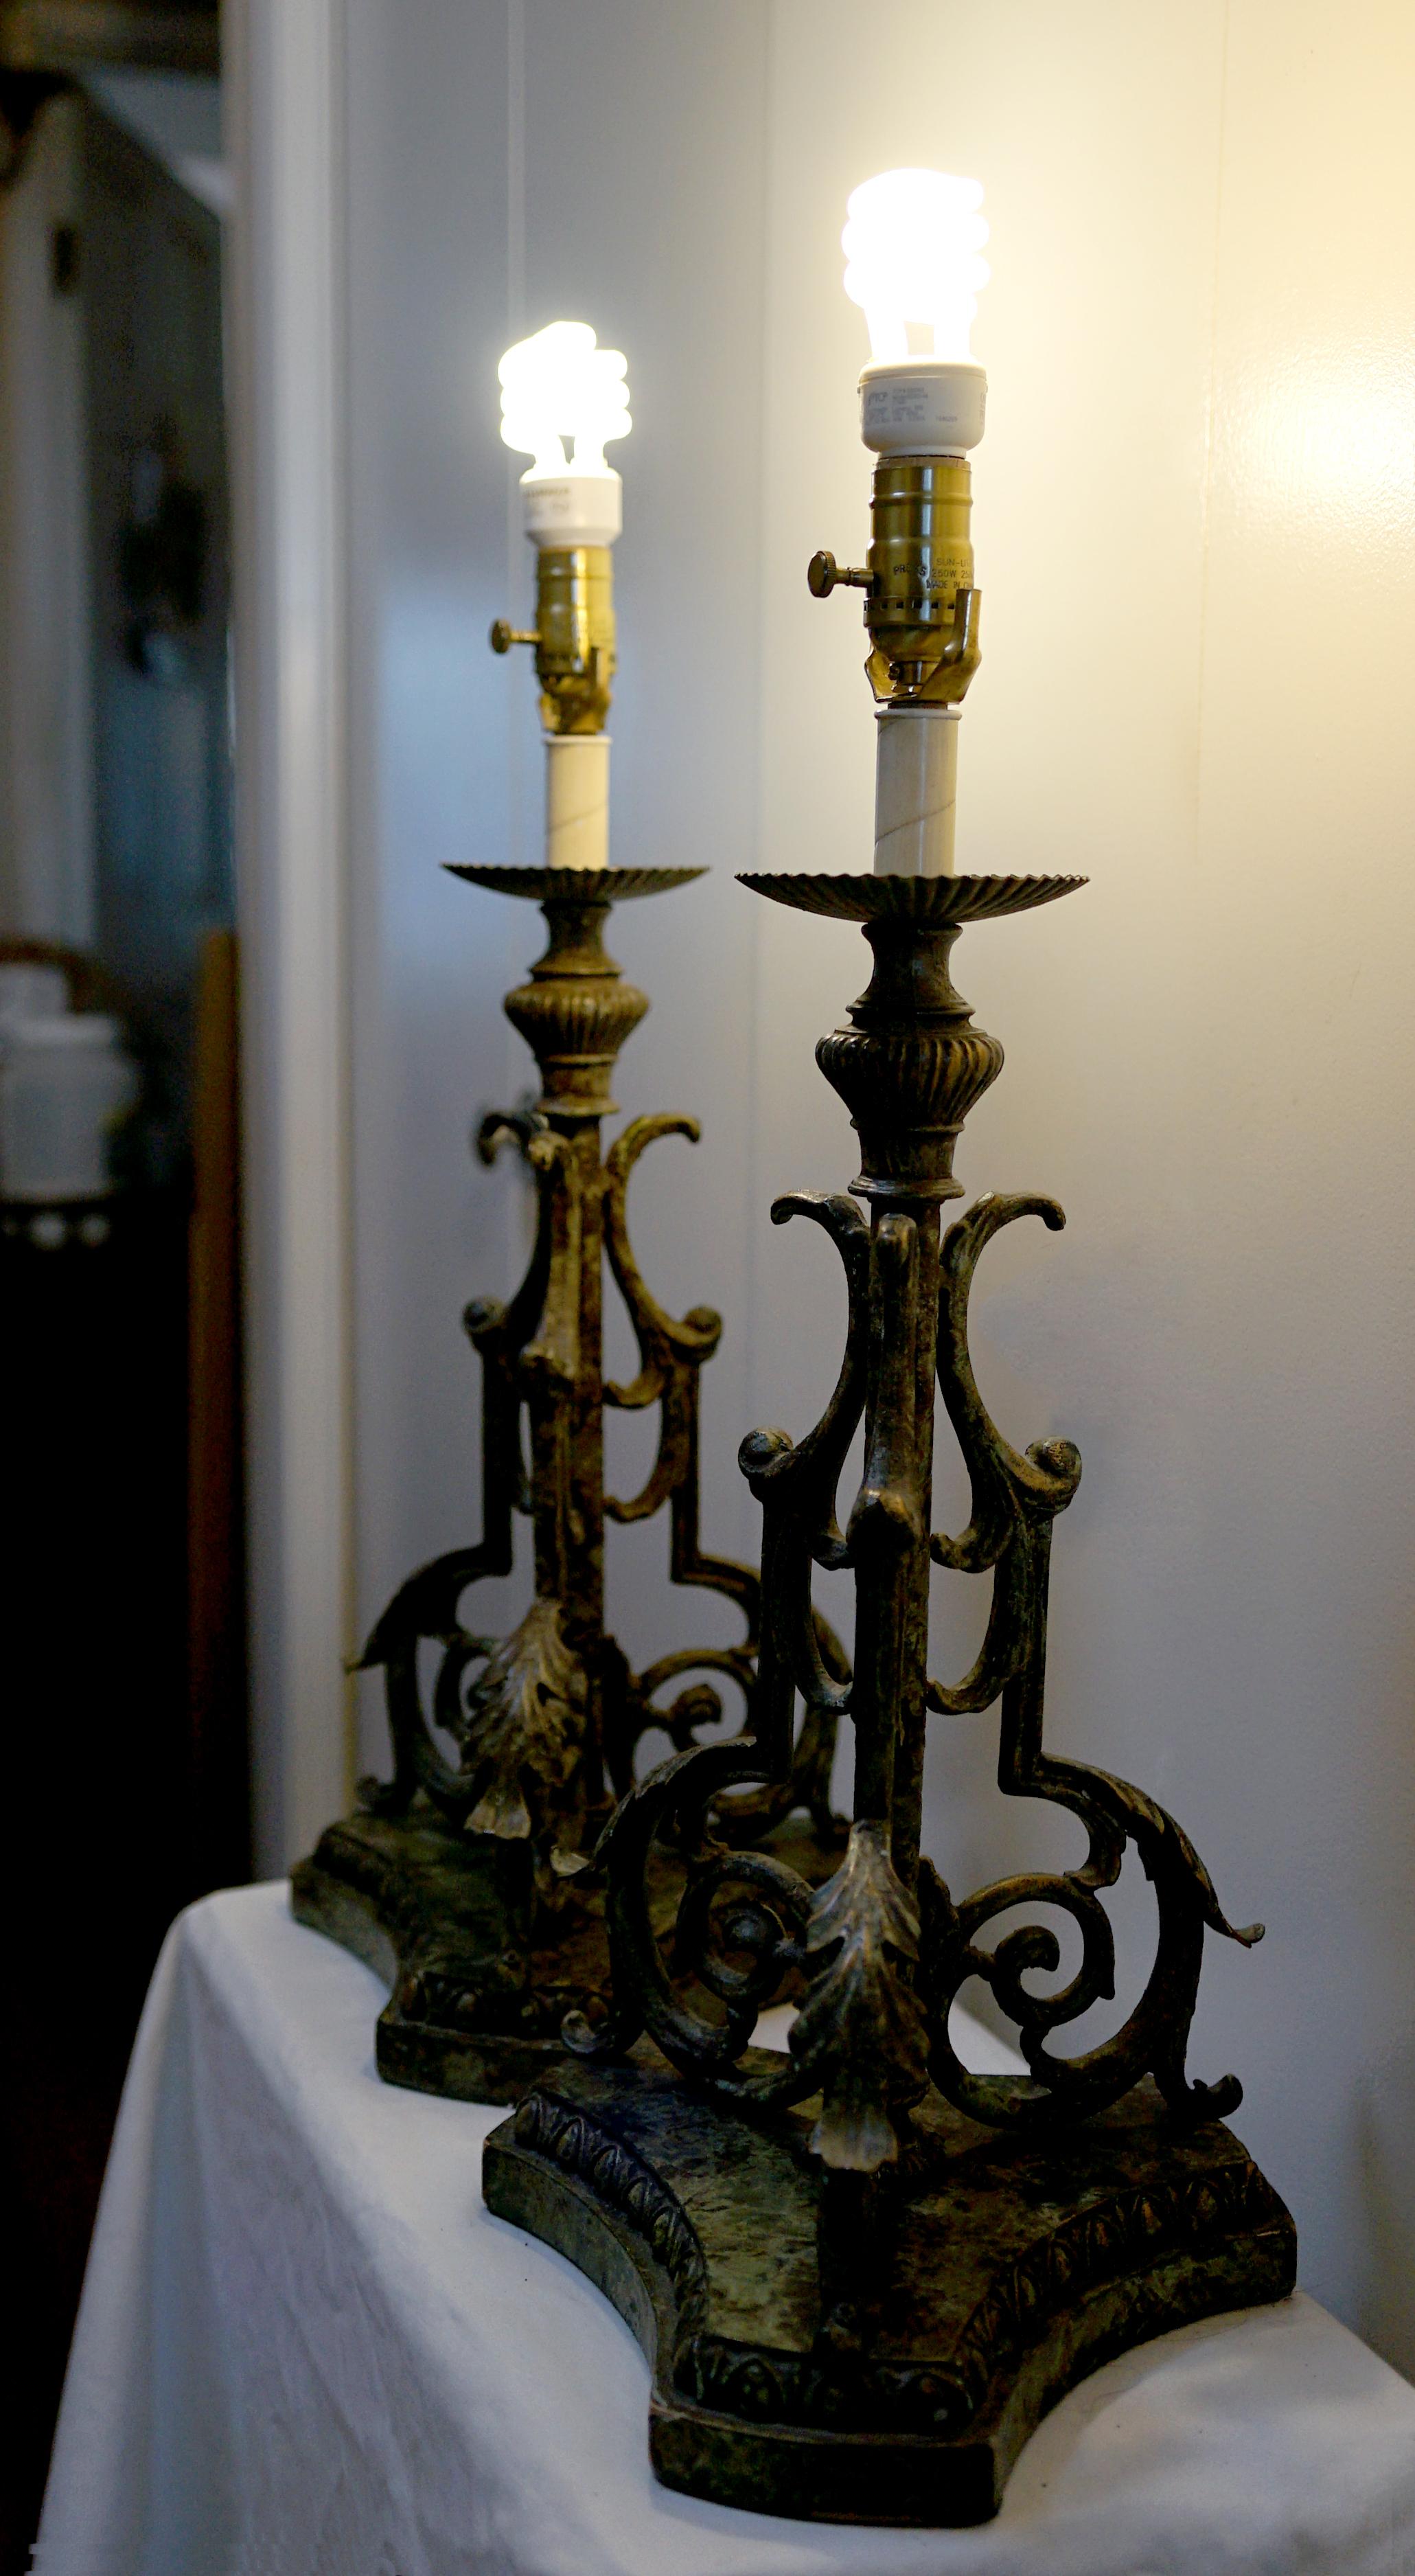 Cast Pair of 19th Century European Pricket Conversion Gothic Table Lamps For Sale